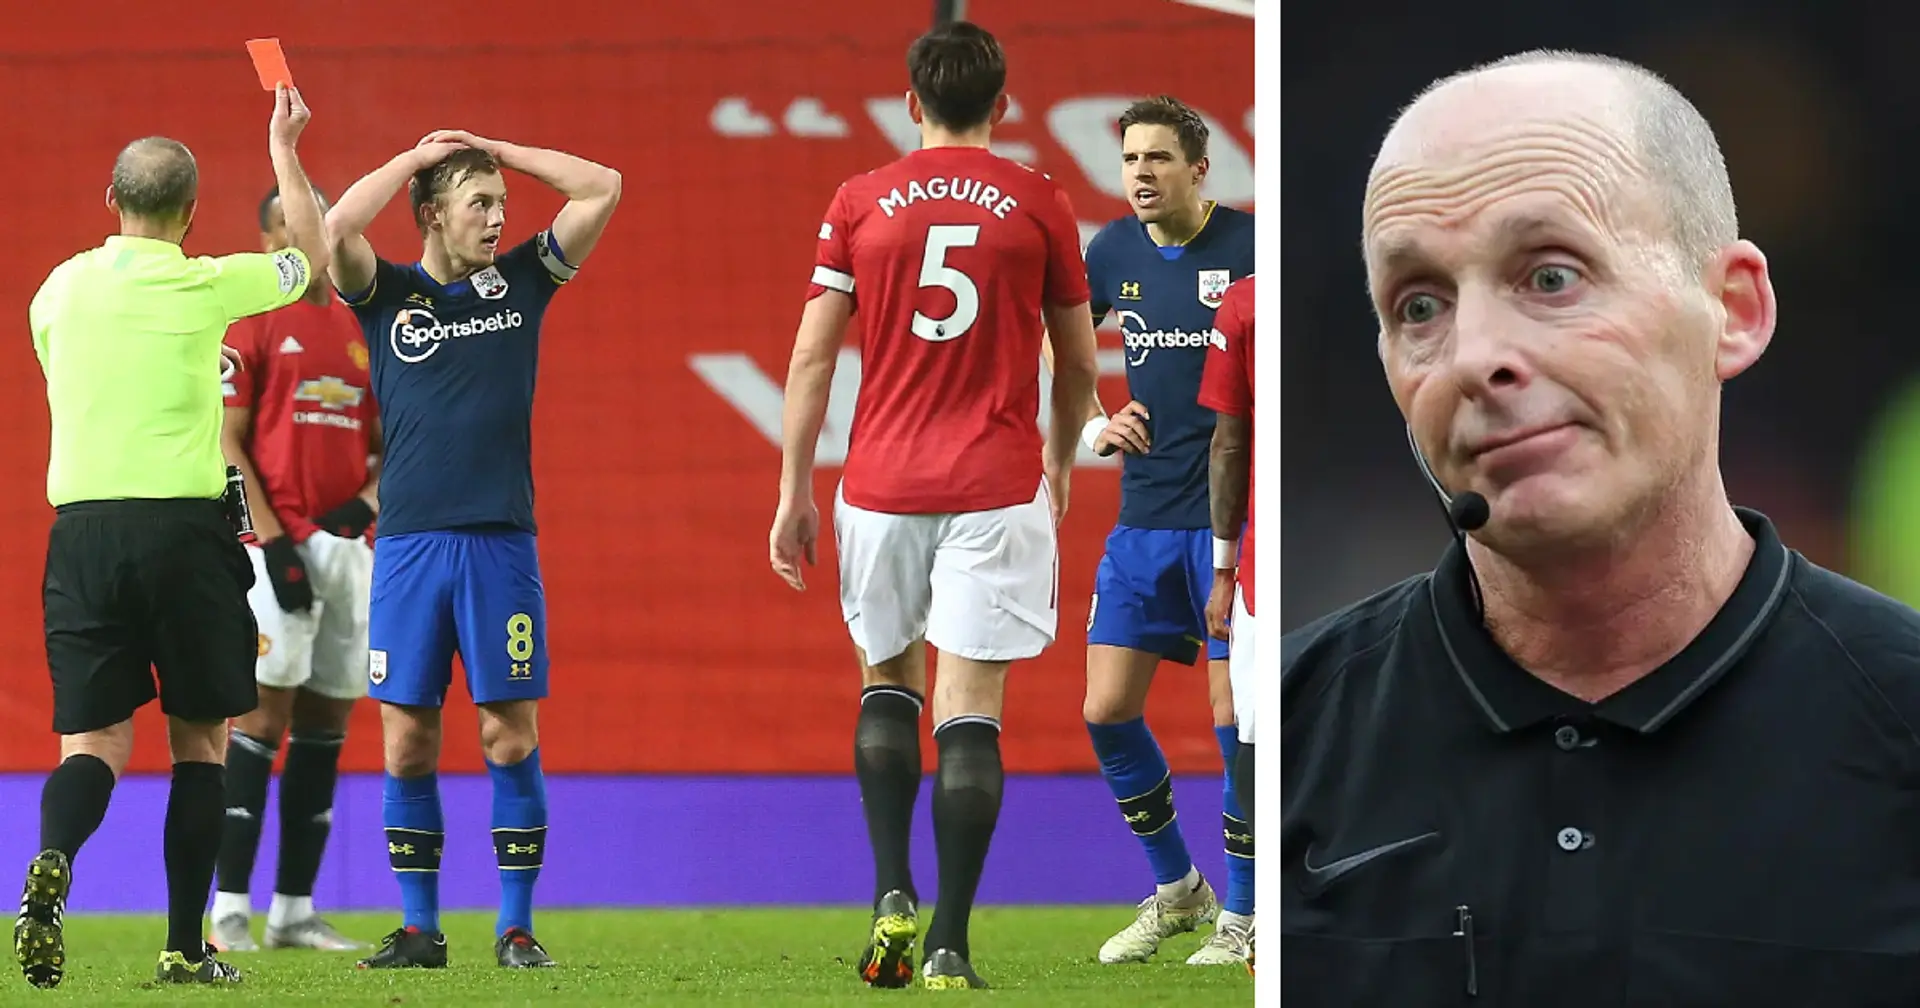 Southampton 'planning to request' to ban Mike Dean and Lee Mason from refereeing their future games 